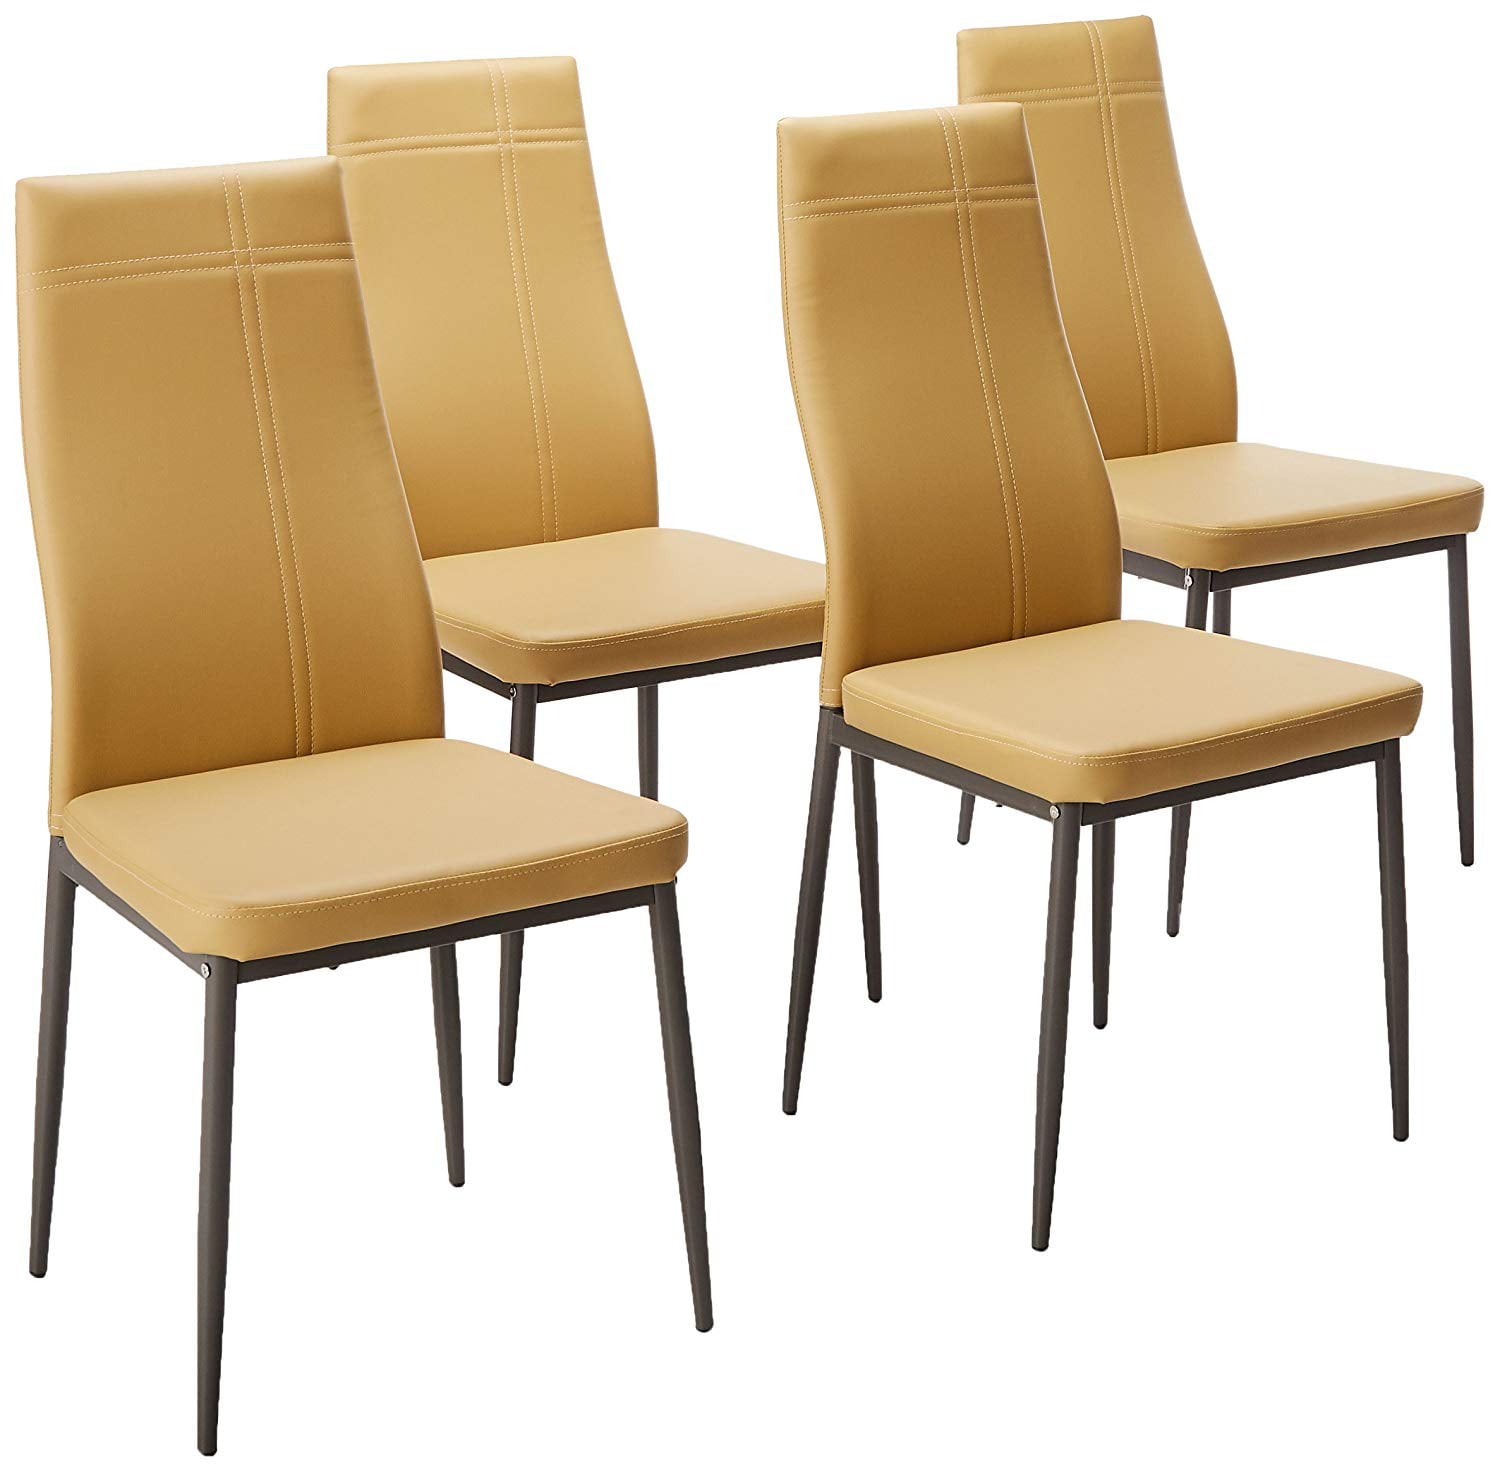 Bri Kitchen Dining Chairs Light Brown, Light Brown Faux Leather Dining Chairs